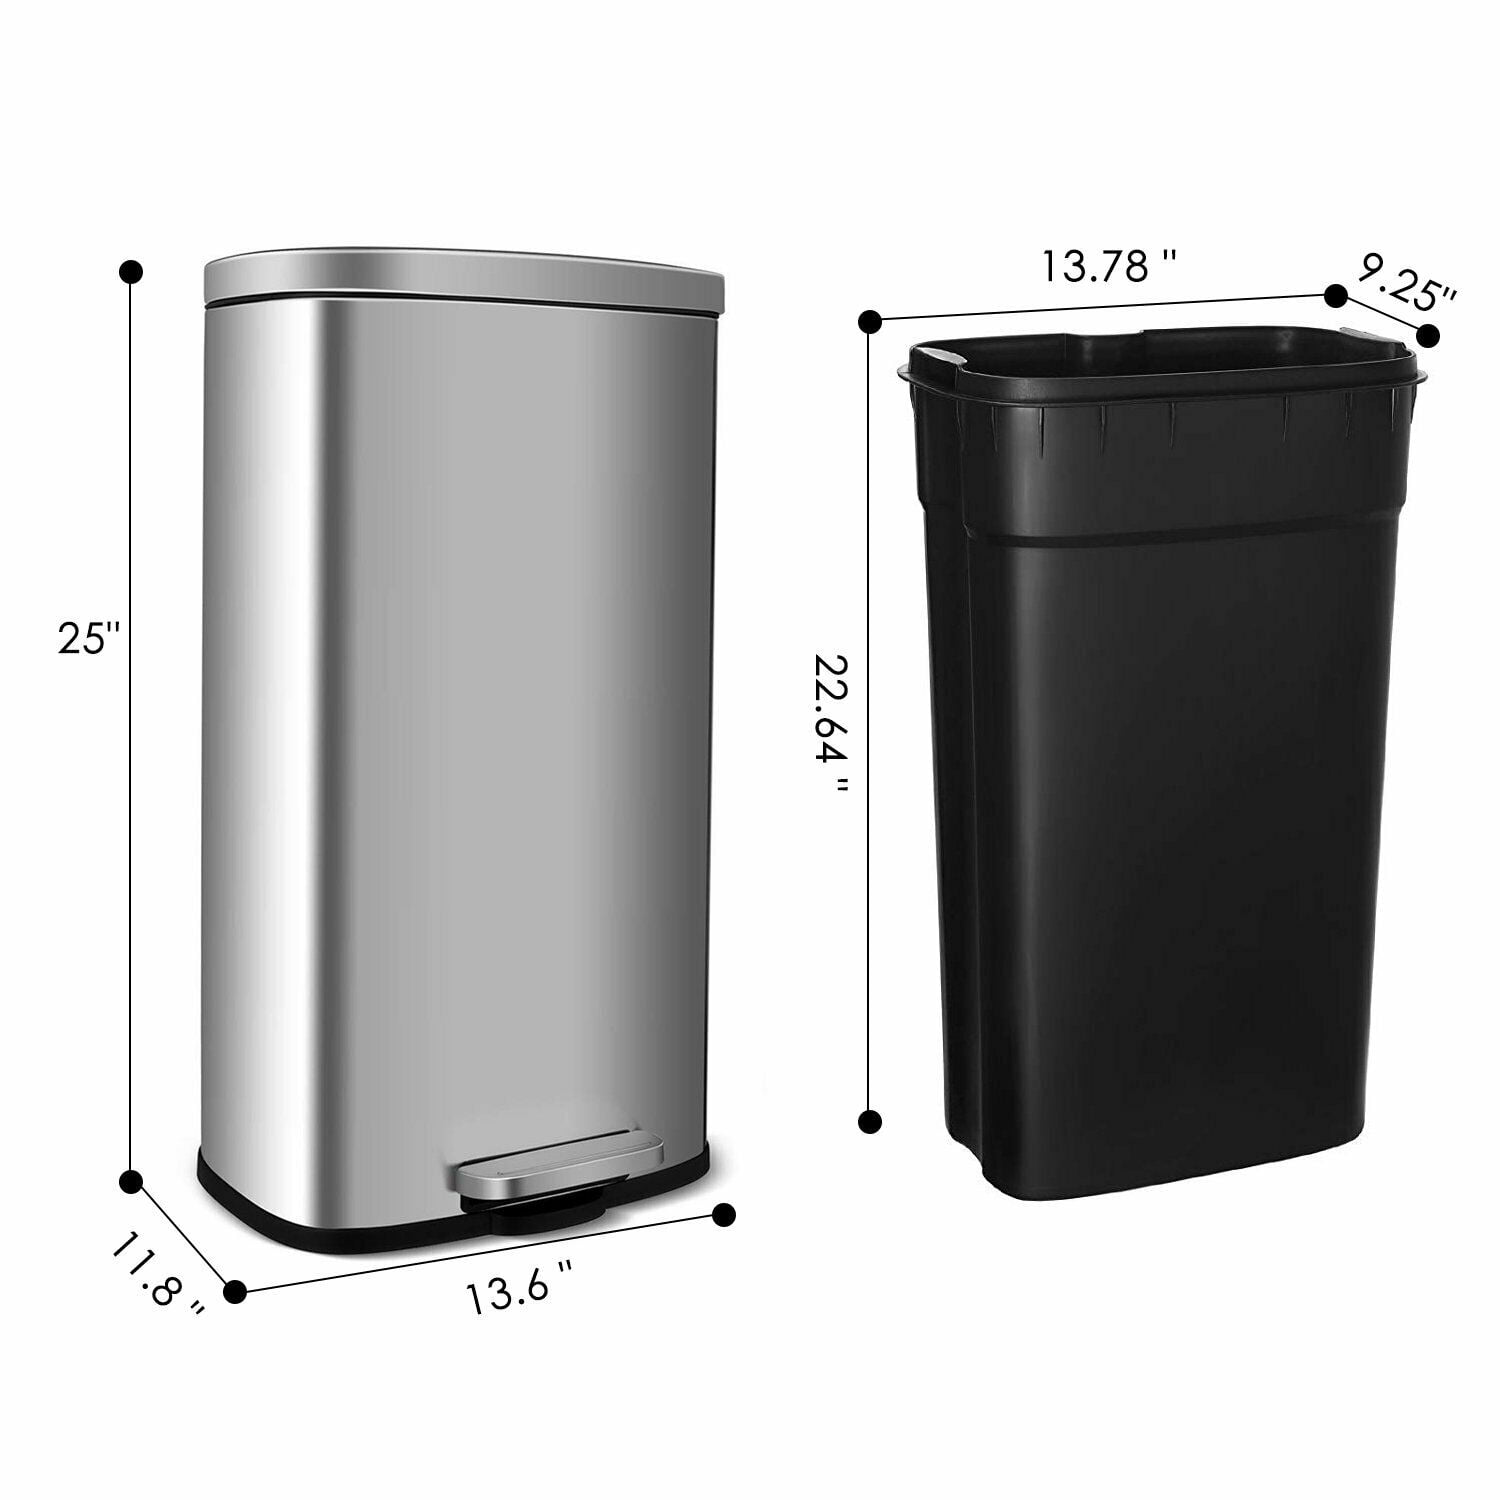 Double Layer Kitchen Trash Can 38L/45L Capacity, Plastic Waste Sorting Bins  With Classified Dustbin Compartments And Double Deck Cover, Space Saving  Storage Solution For Home & Office From Luo09, $55.36